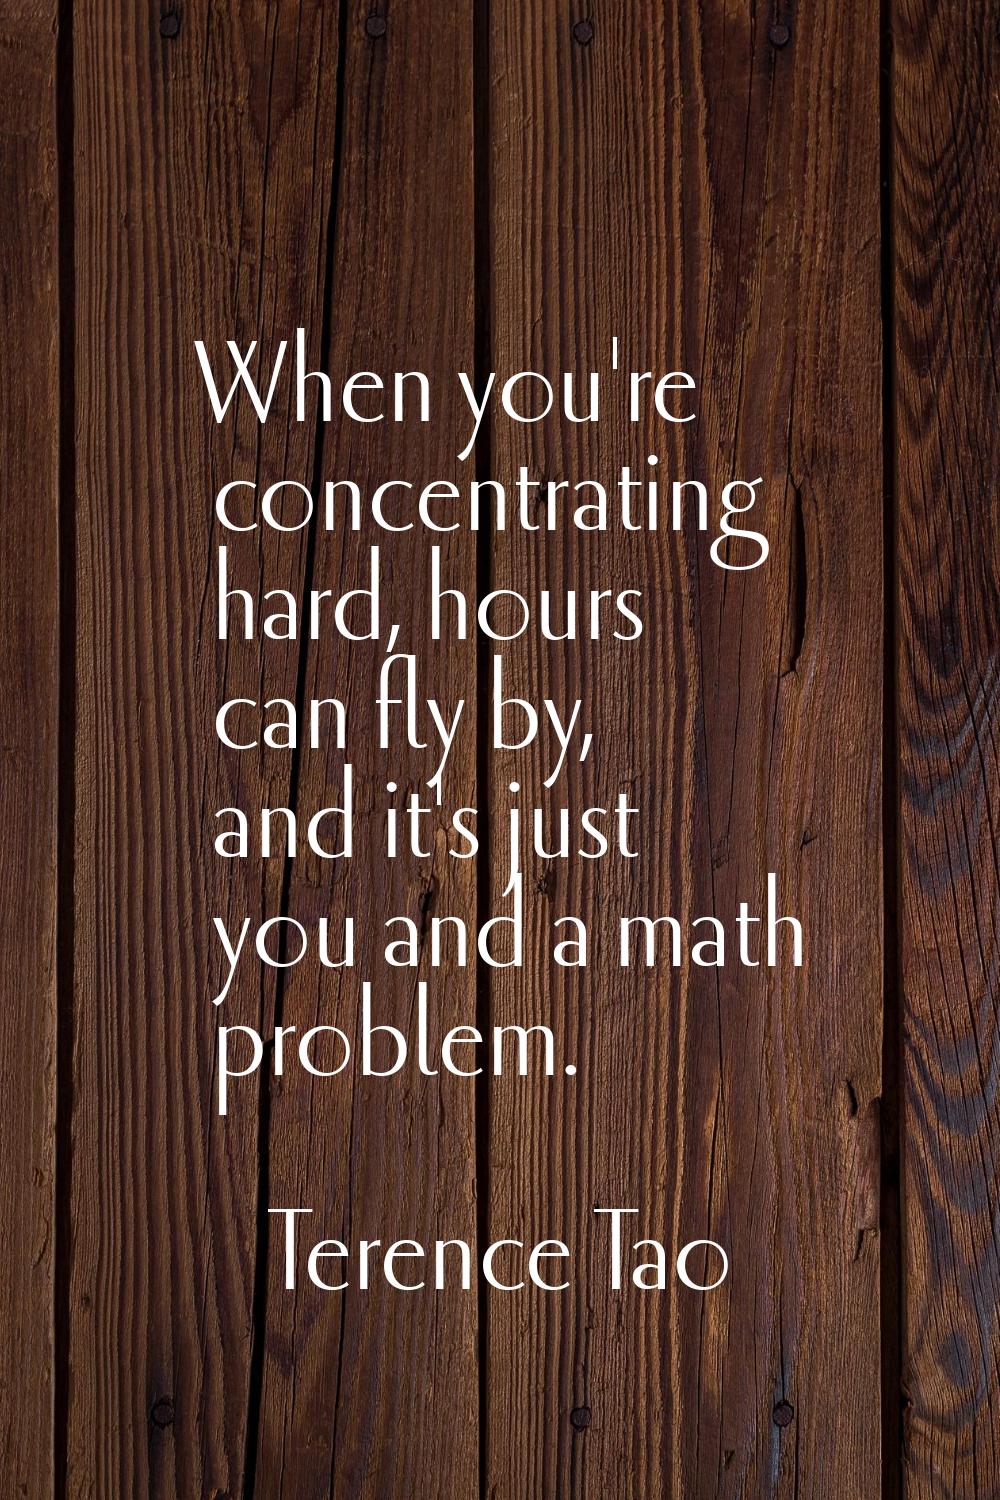 When you're concentrating hard, hours can fly by, and it's just you and a math problem.